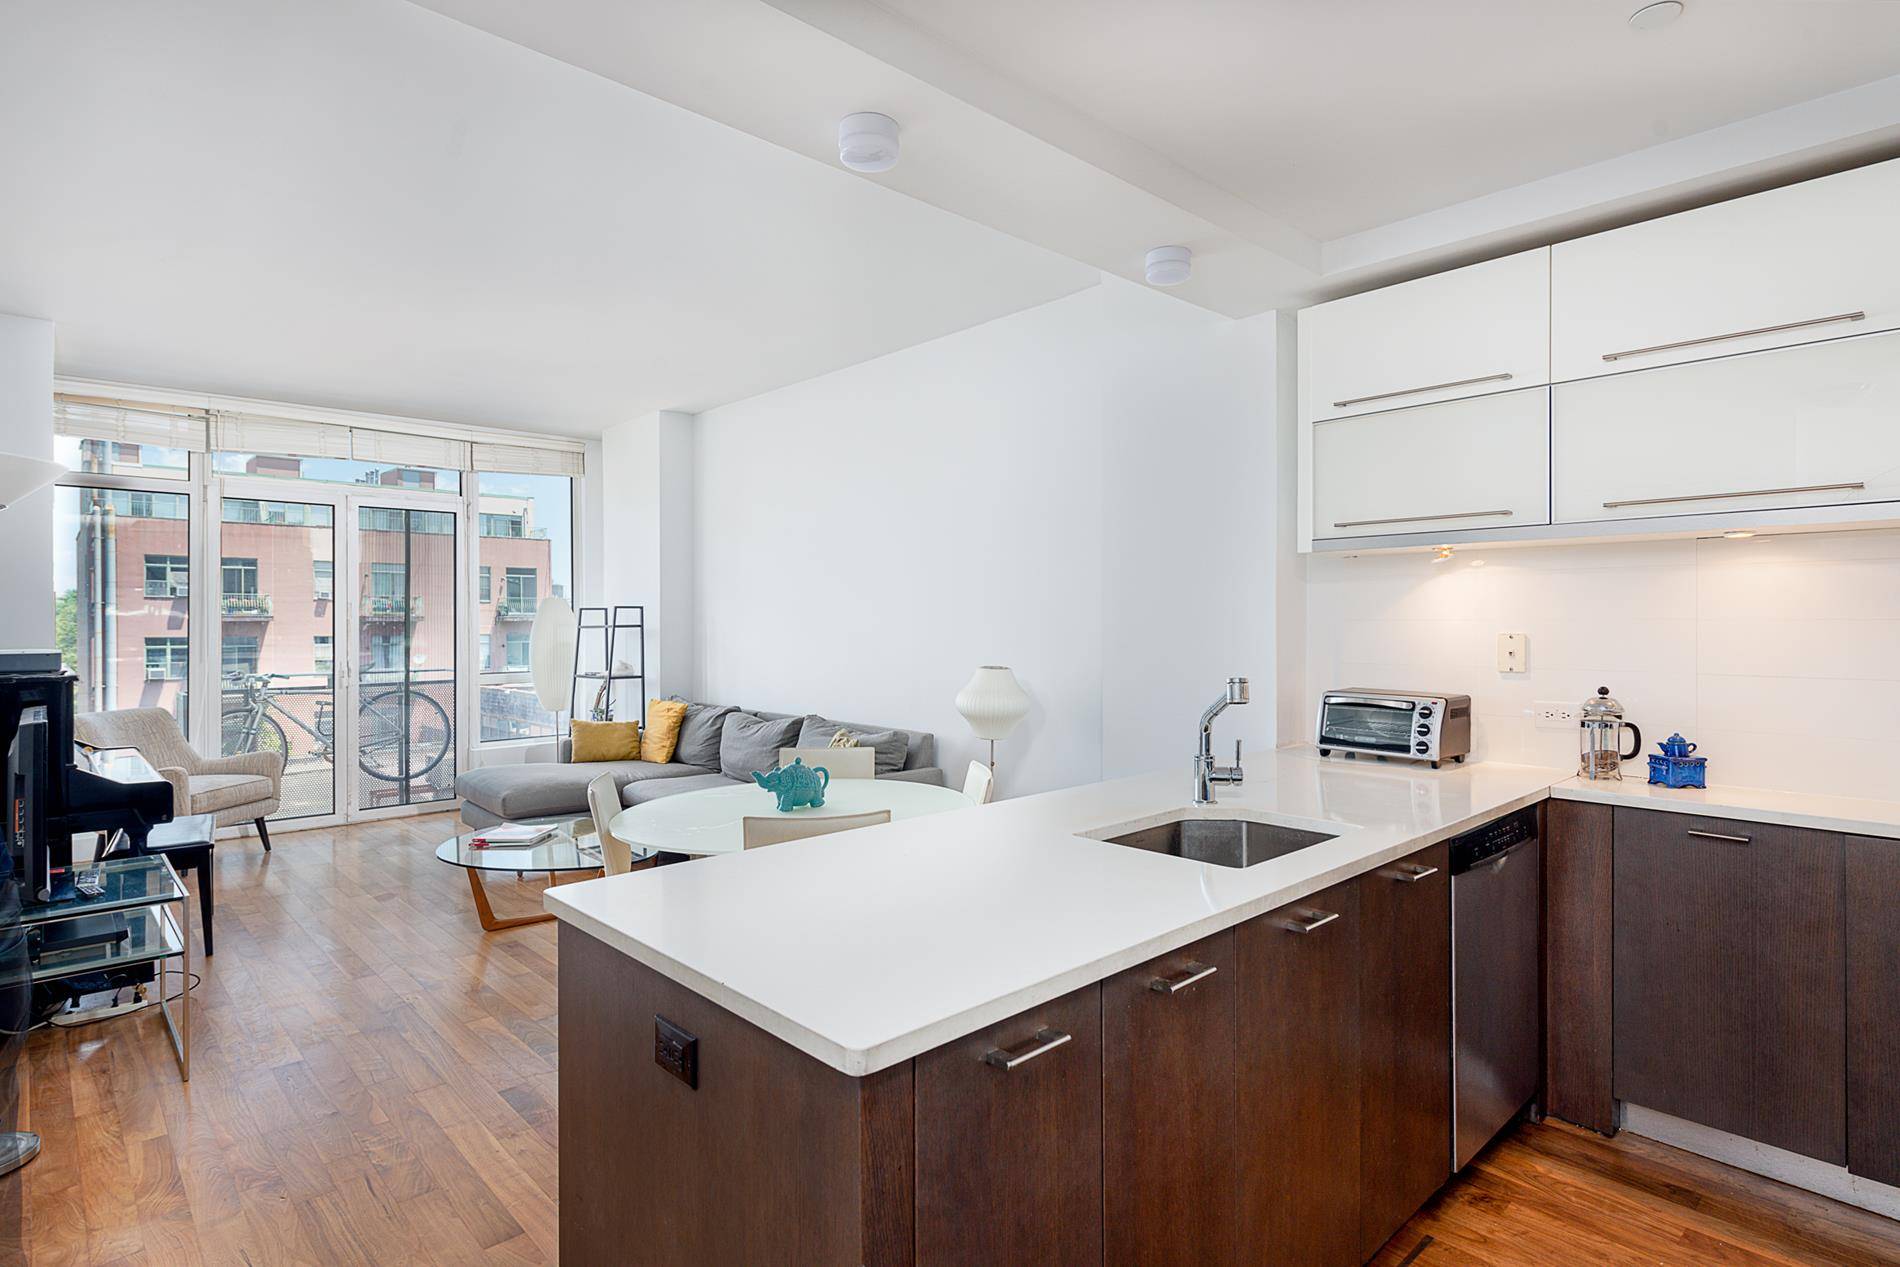 Two bedroom Condo Located On The Northside Of Williamsburg.